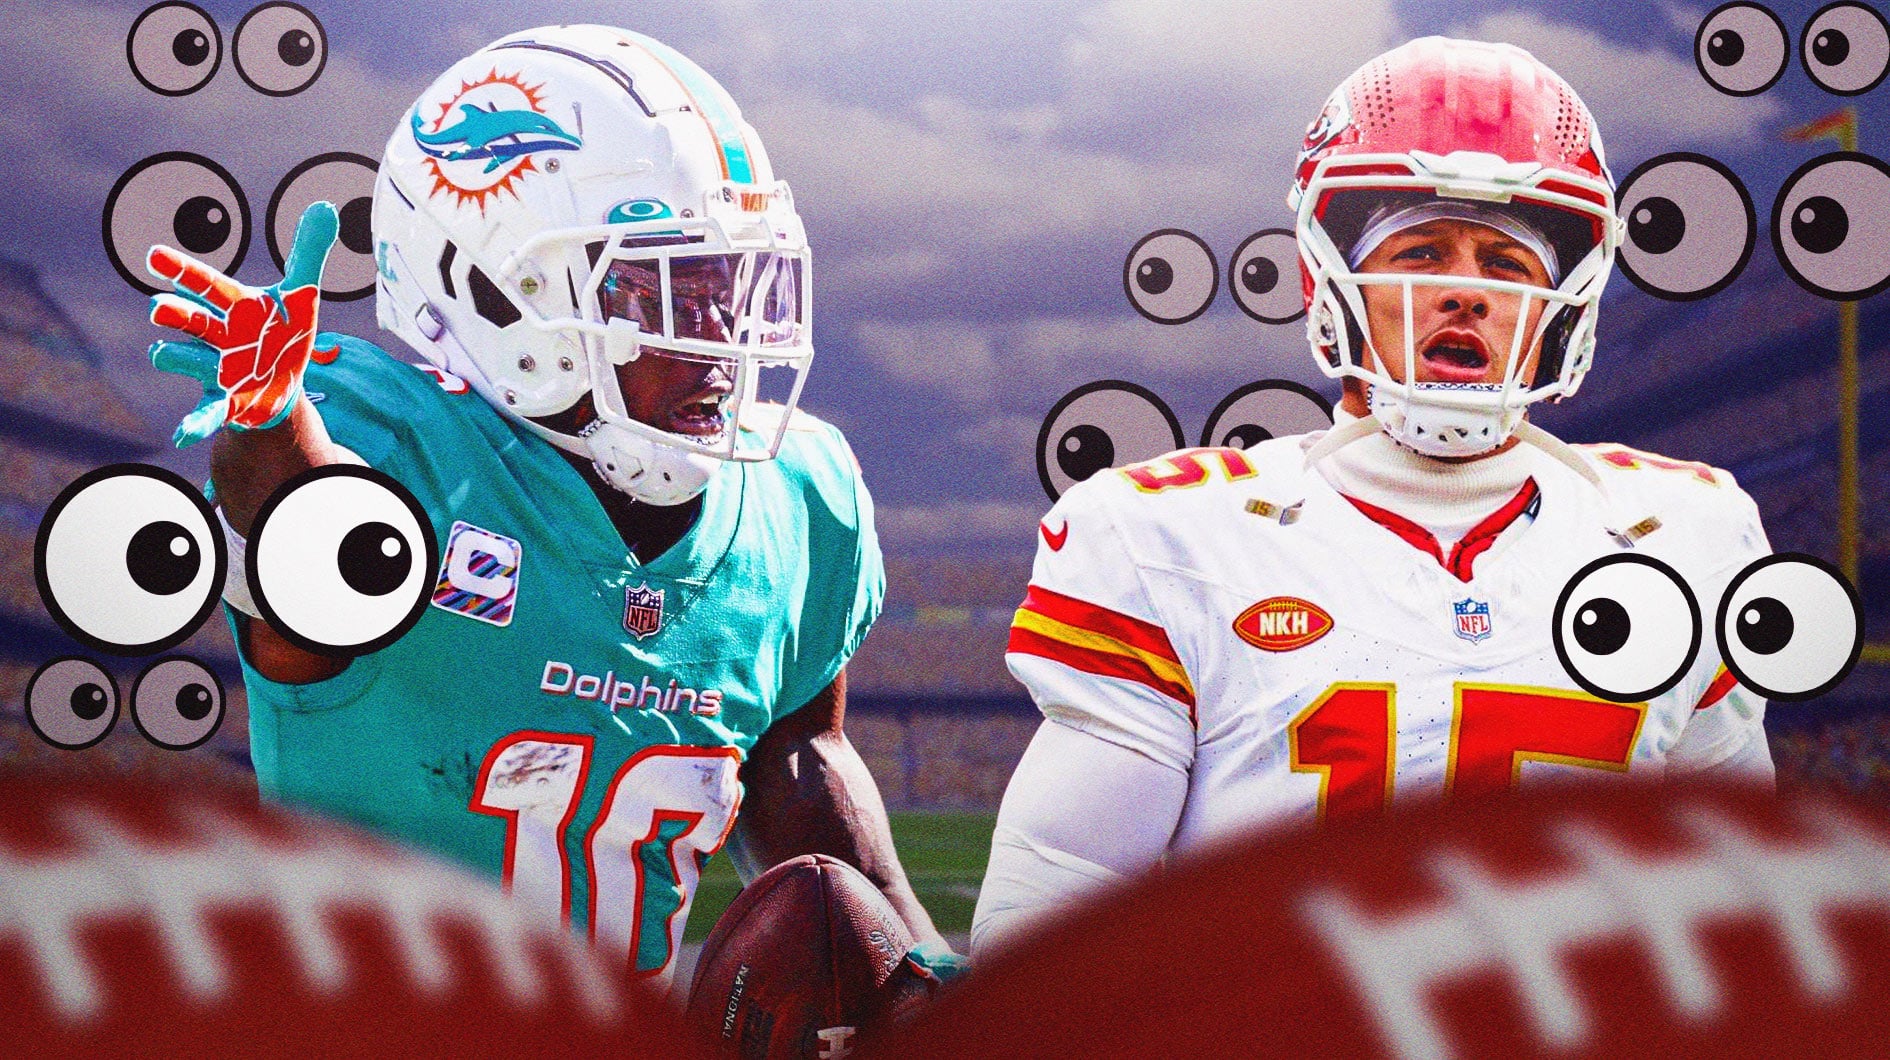 Tyreek Hill and Patrick Mahomes with eyeball emojis all over.